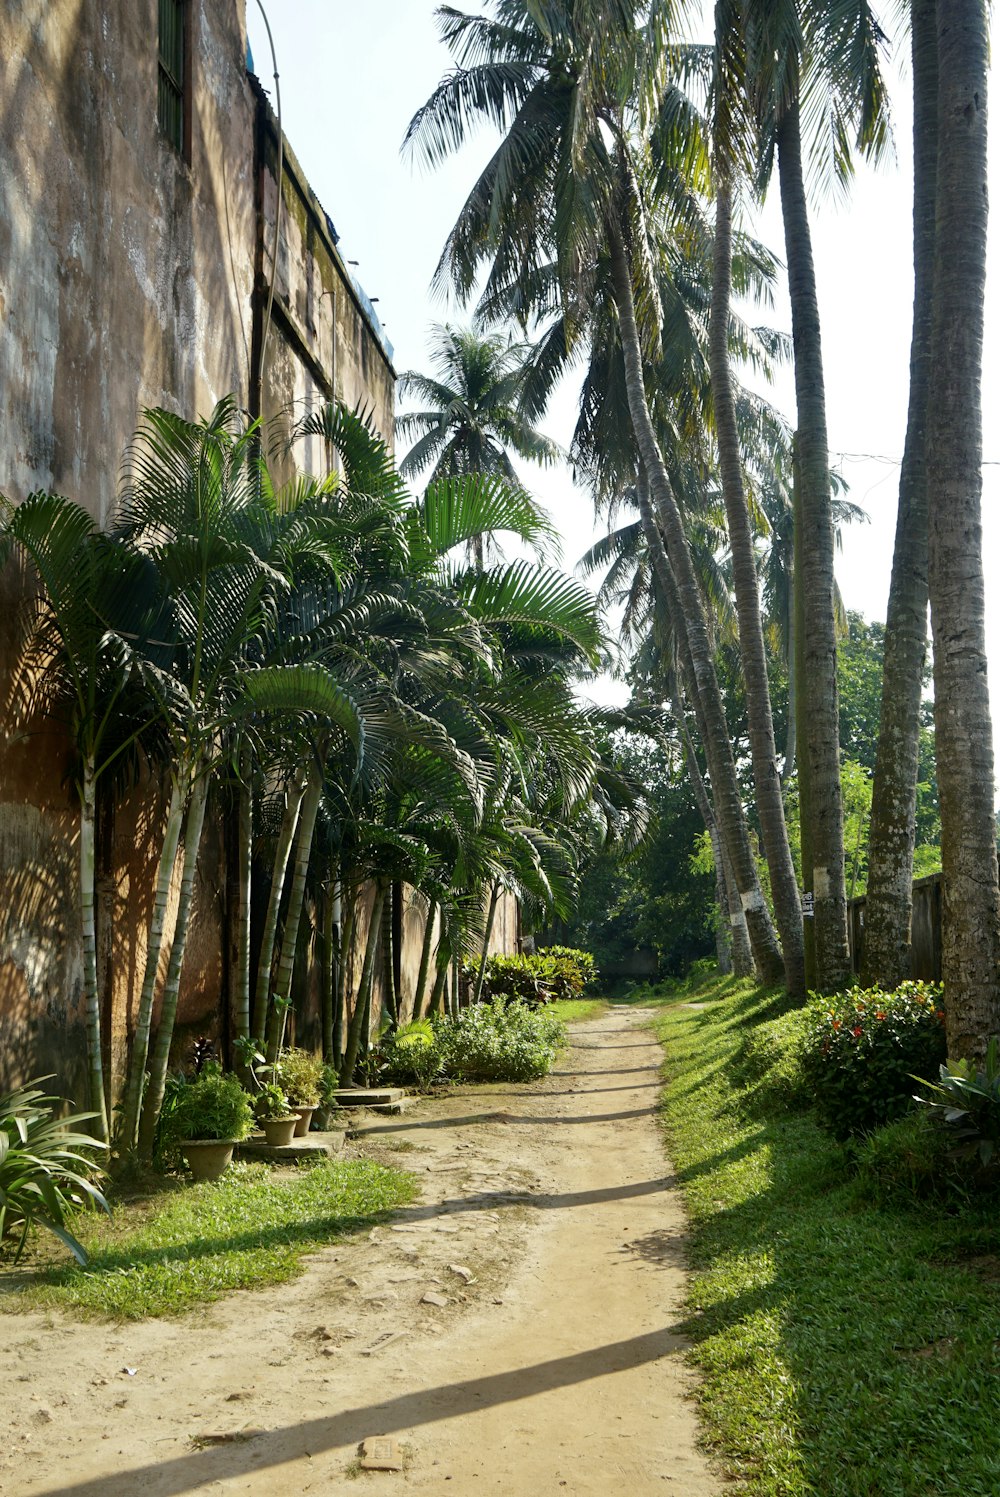 a dirt road surrounded by palm trees next to a building